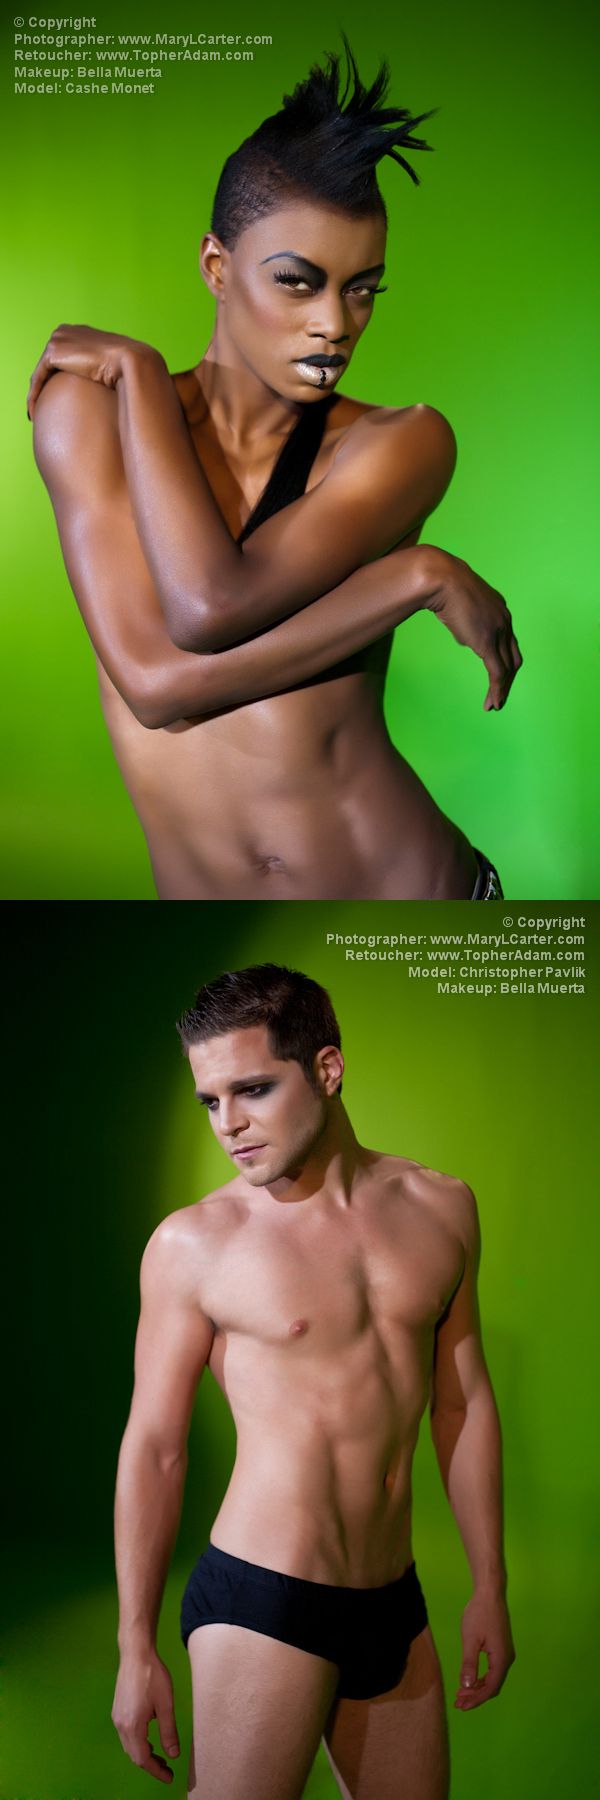 Female and Male model photo shoot of 3CubedStudios, Christopher Pavlik and Cashe Monet, makeup by Bella Muerta Makeup 